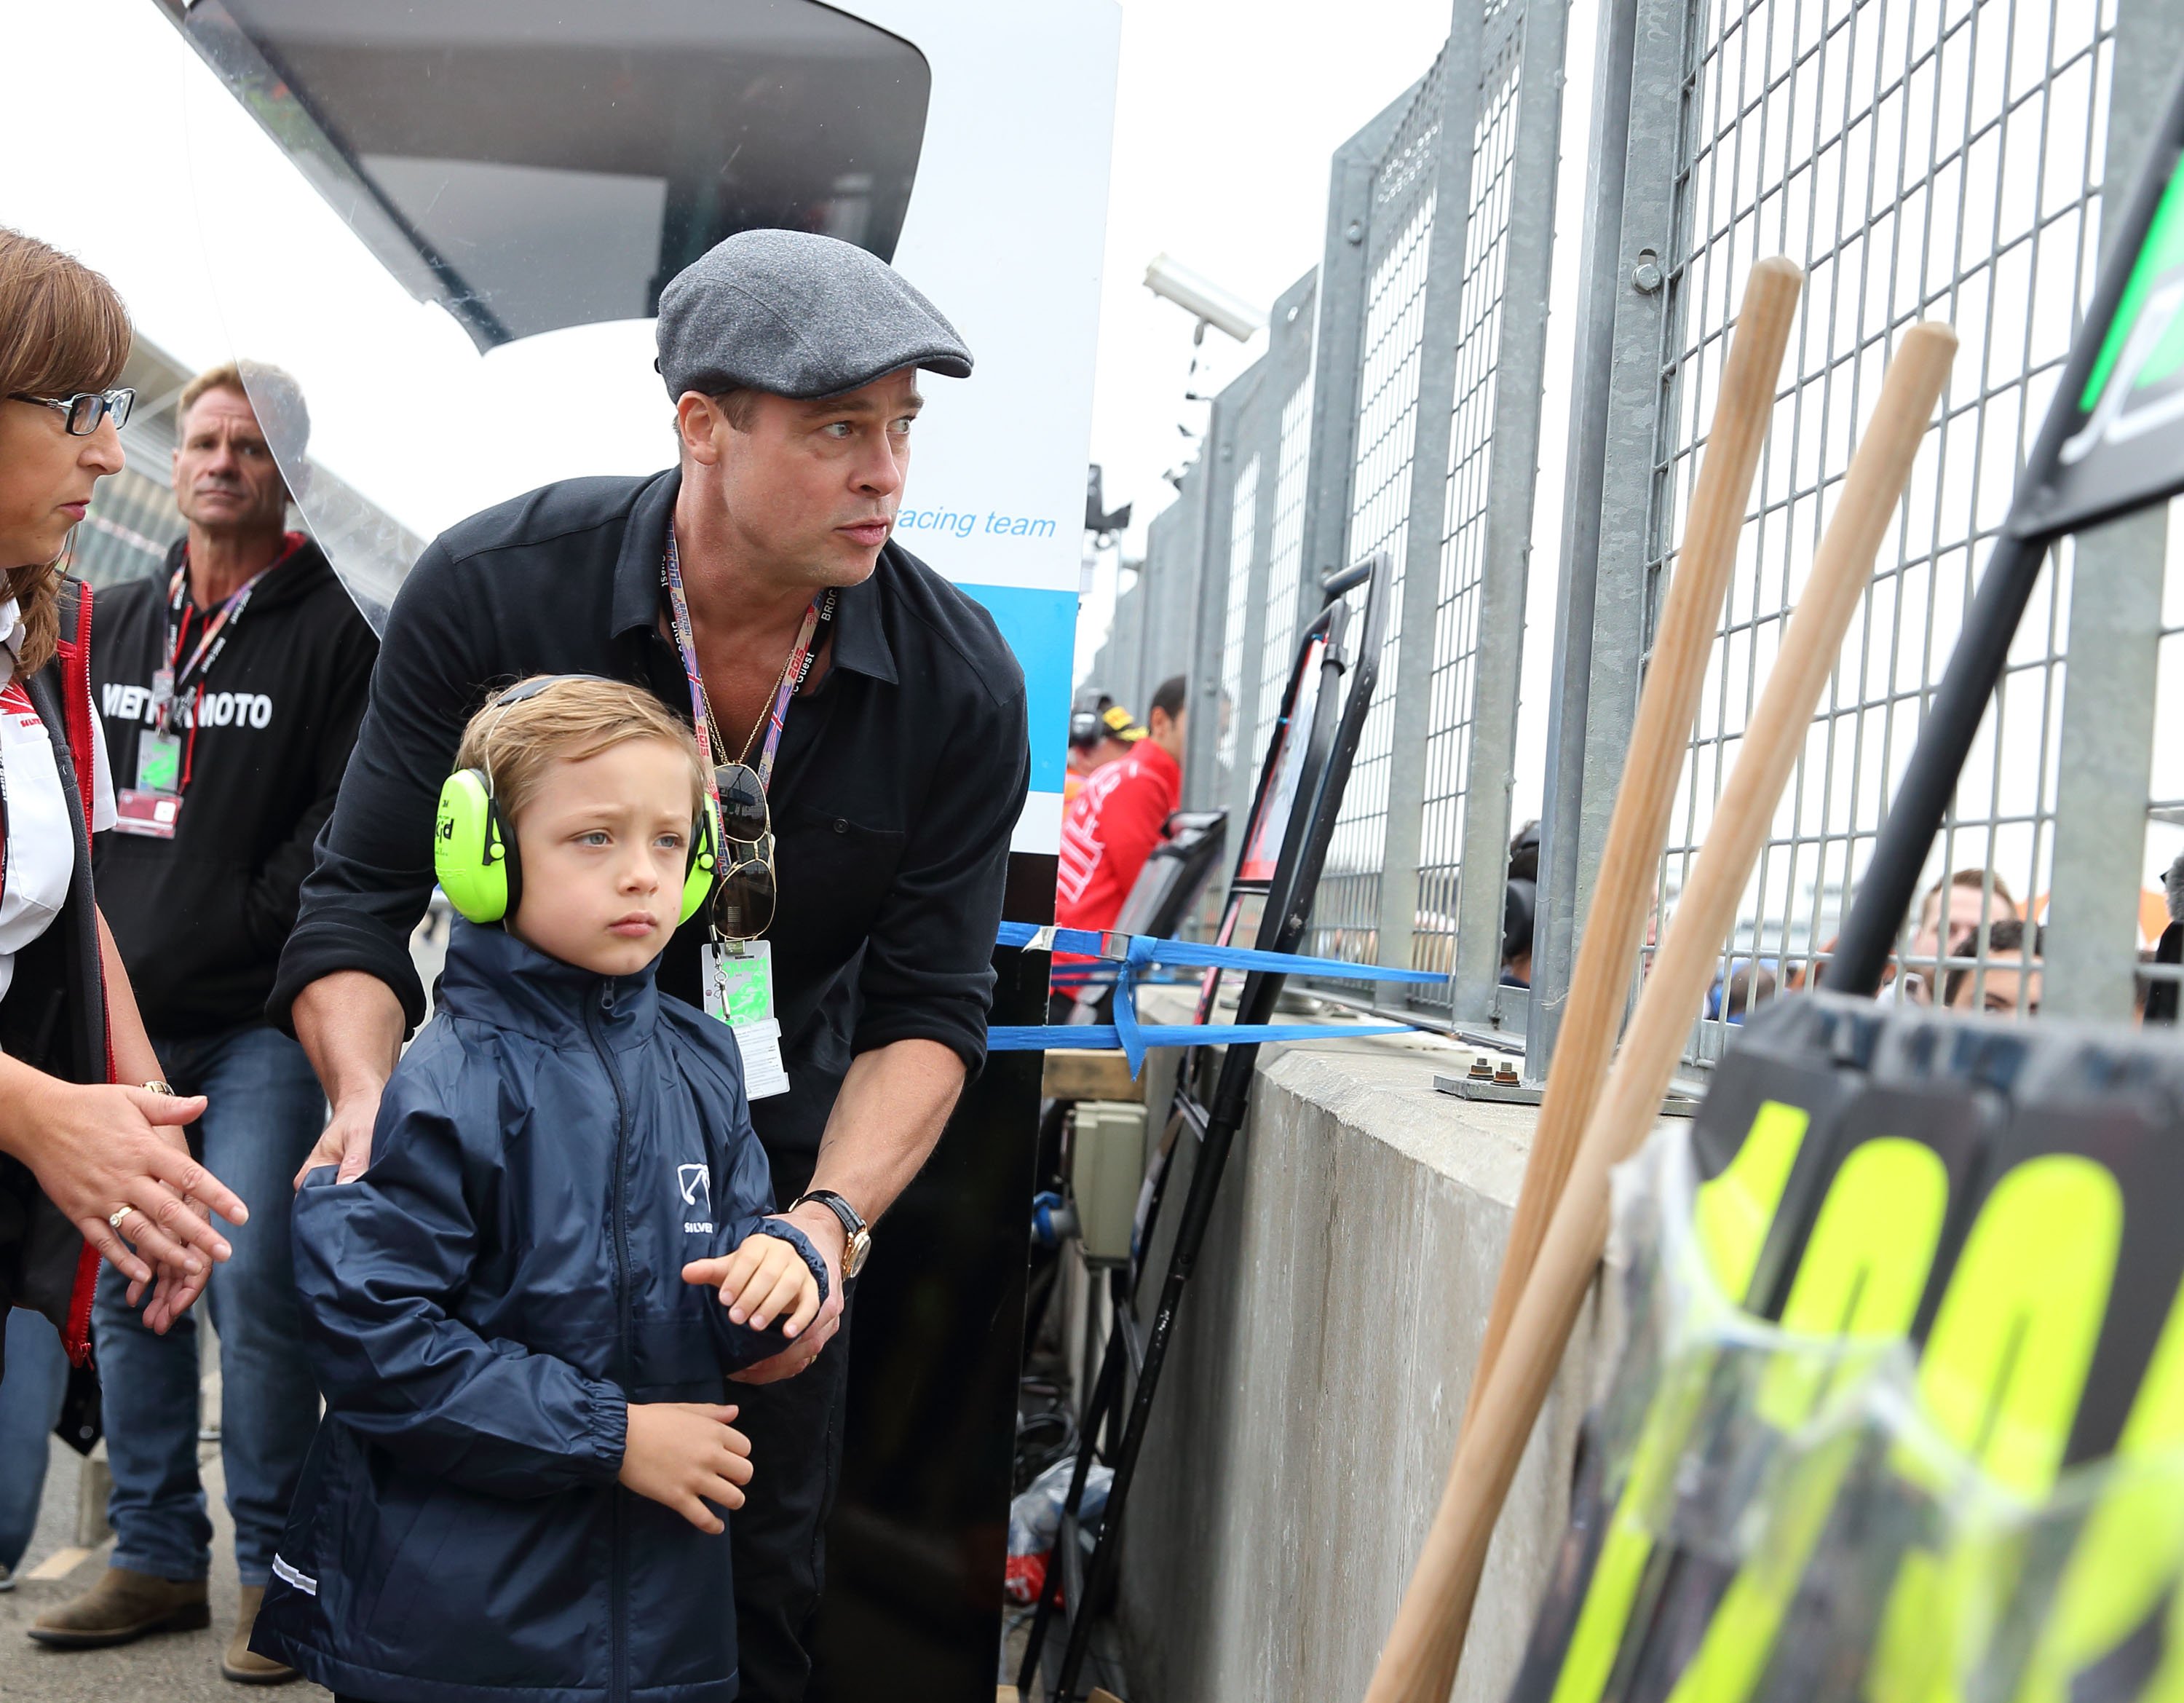 Brad Pitt and Knox Jolie-Pitt at the MotoGP British Grand Prix race at Silverstone on Aug 30, 2015 in Northampton, England |  Source: Getty Images